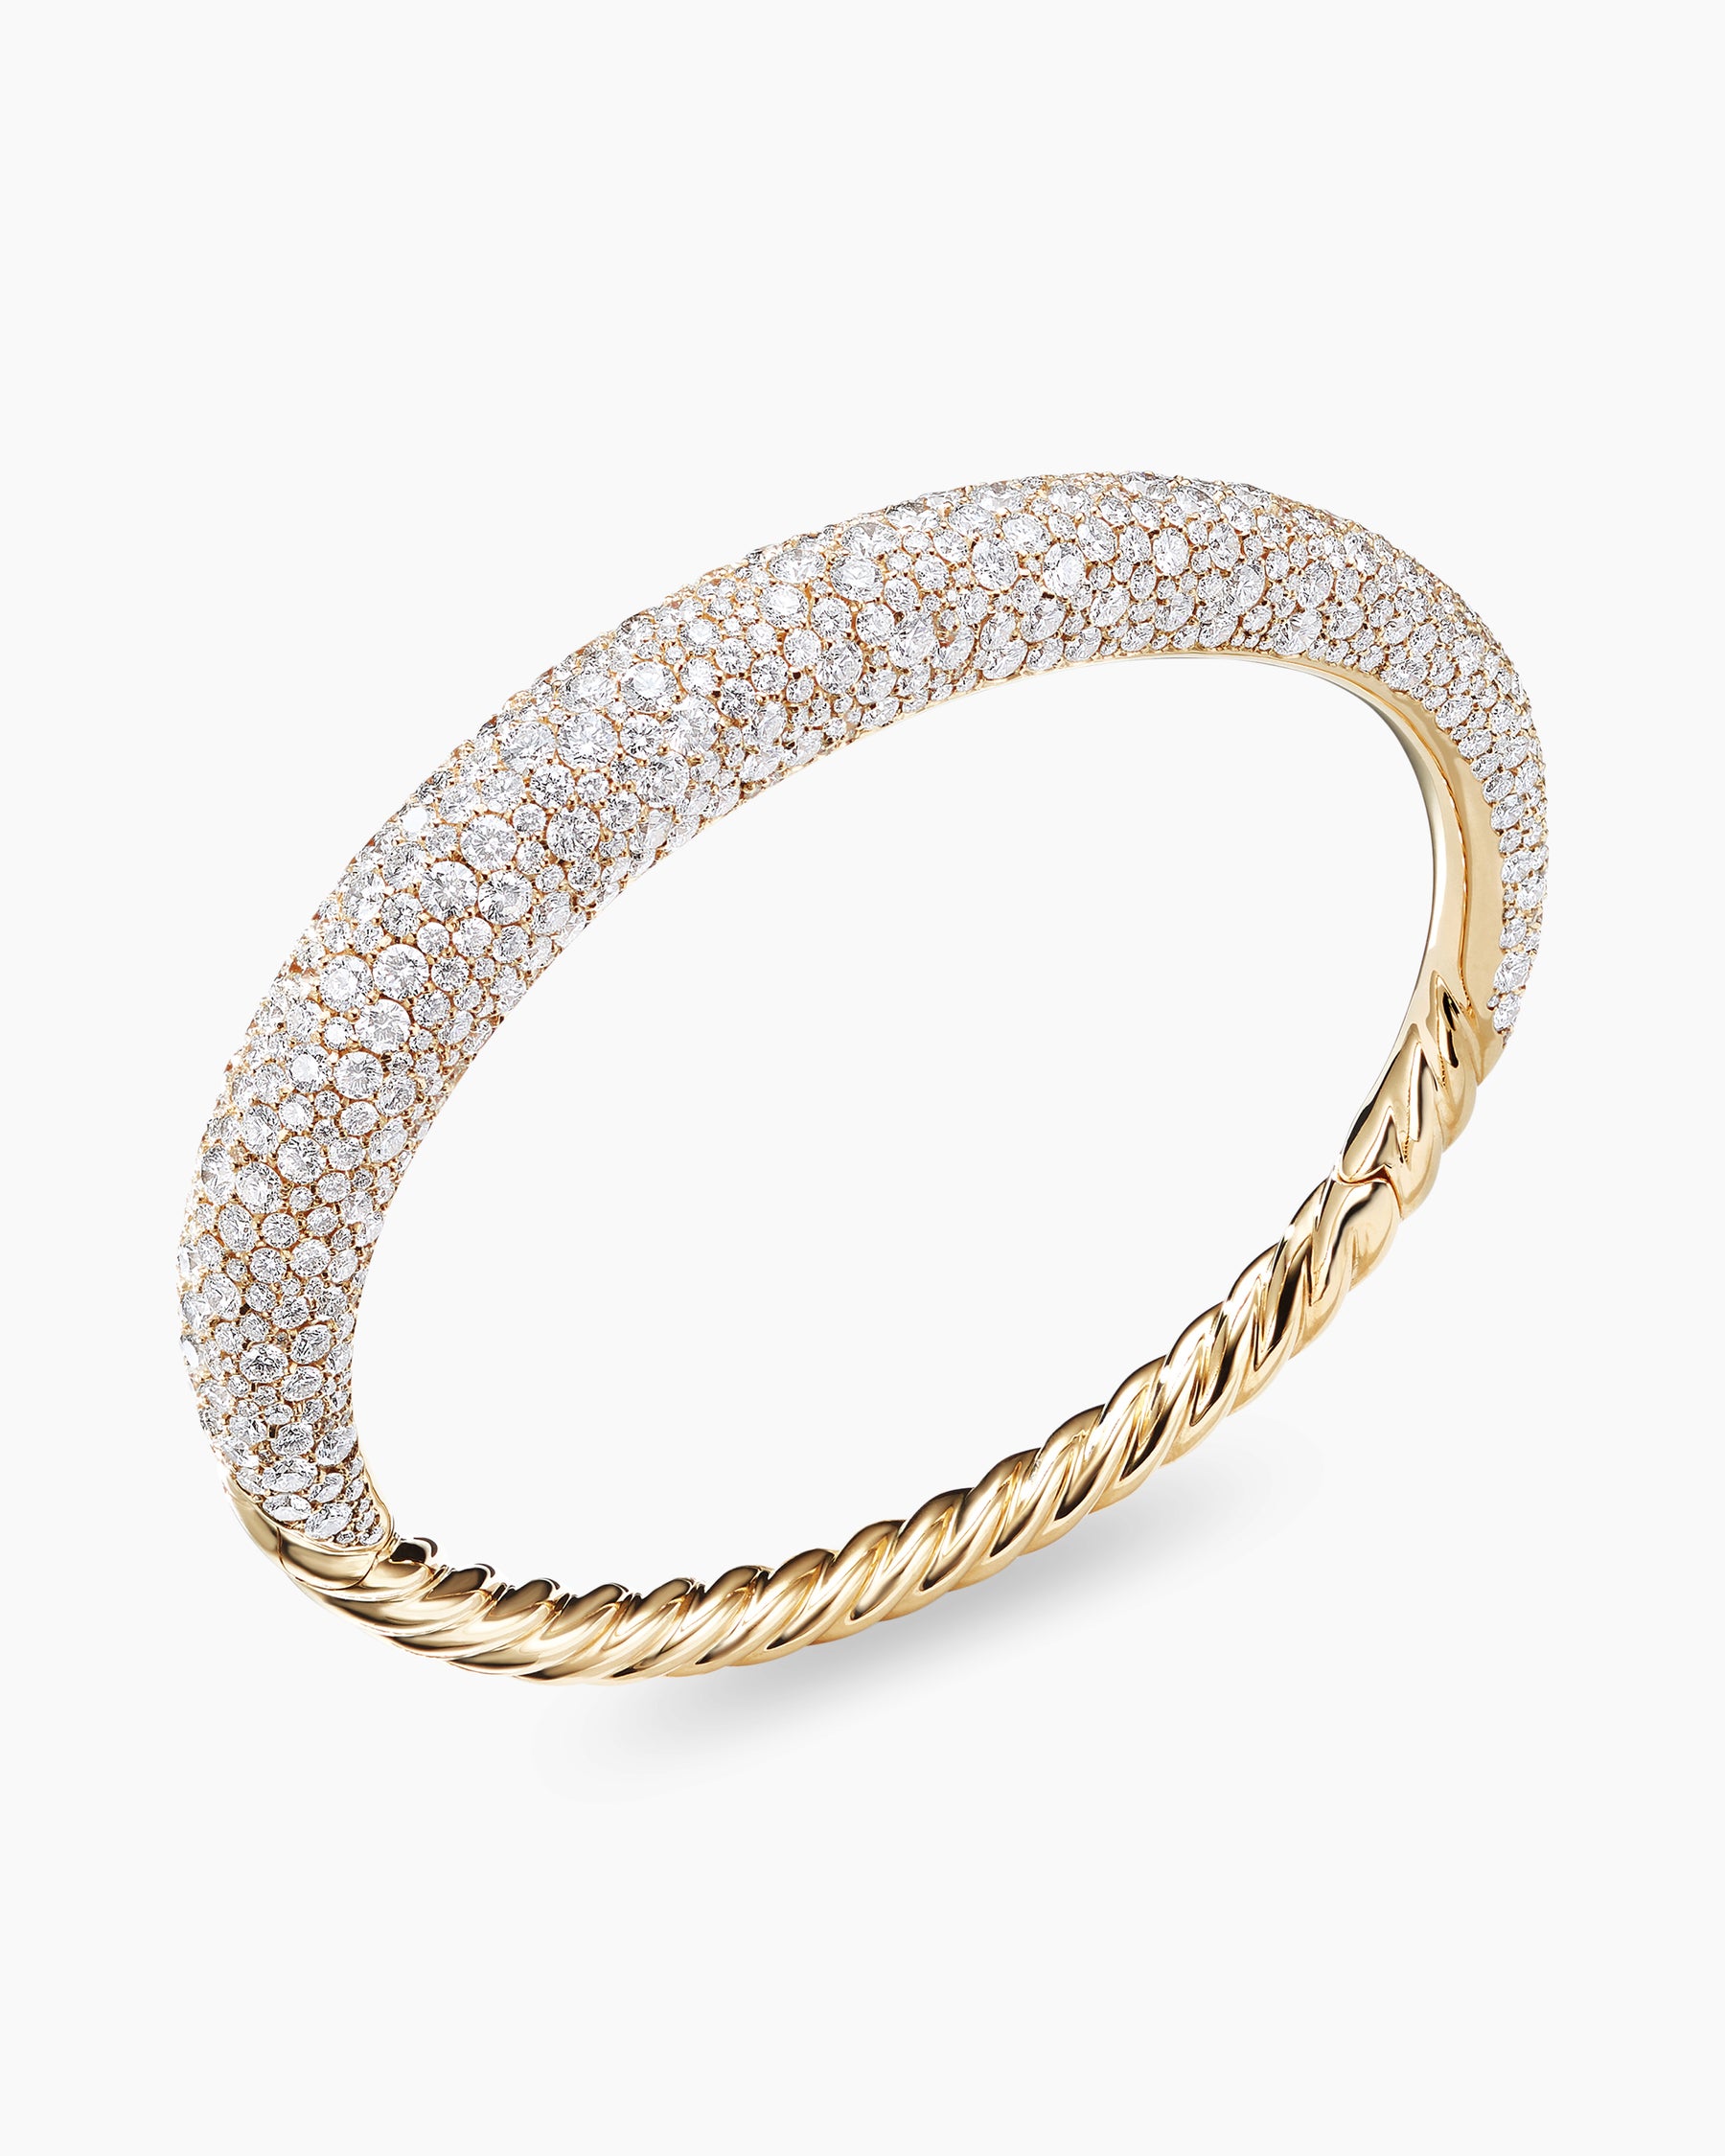 Pure Form® Smooth Bracelet in 18K Yellow Gold with Full Pavé Diamonds, 9.5mm